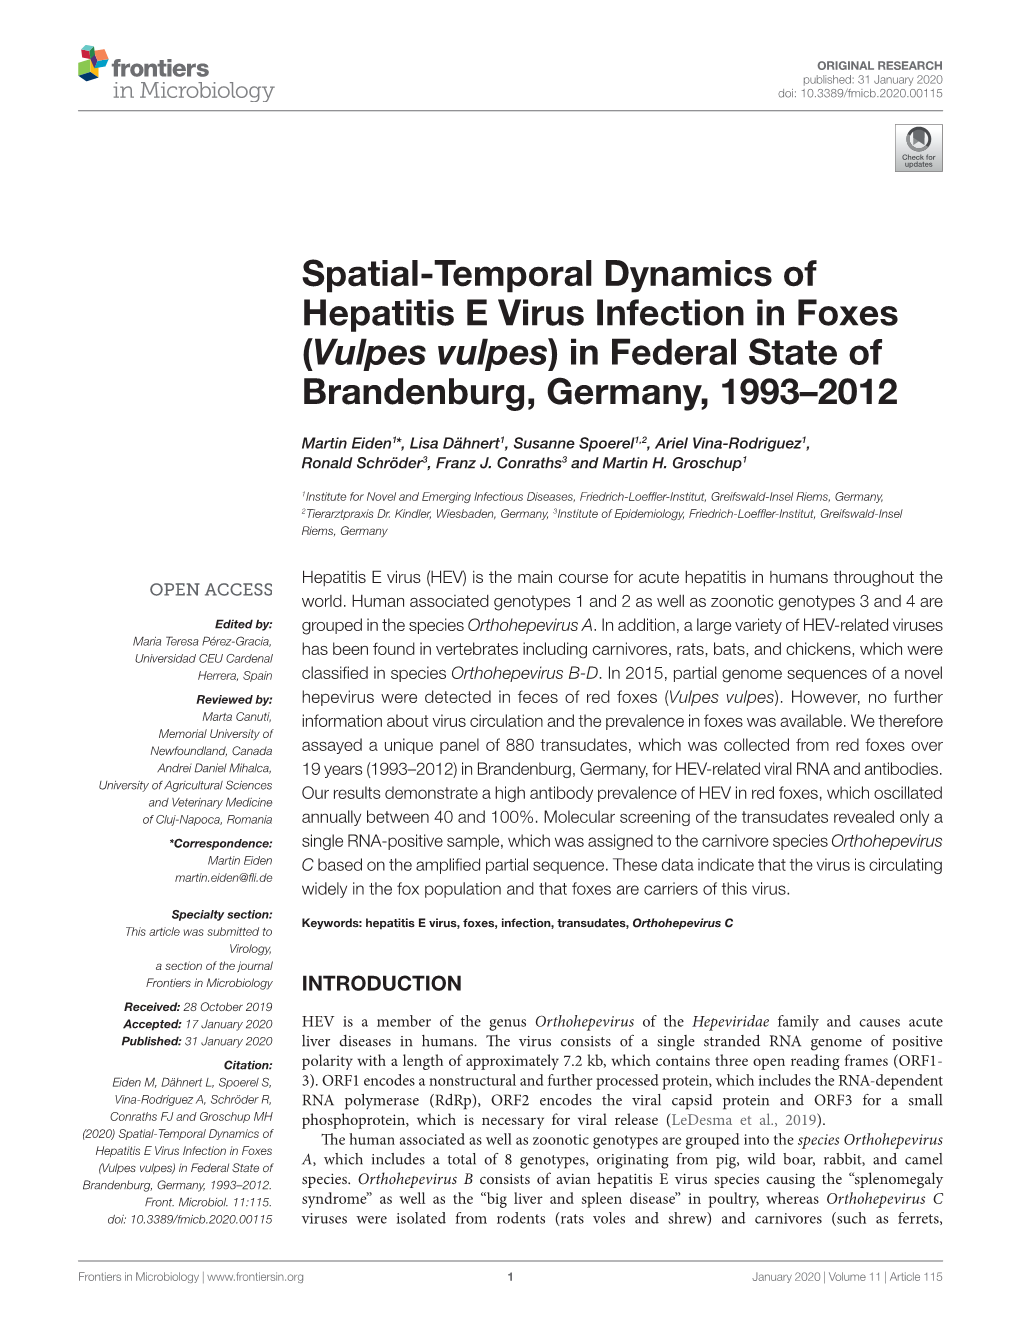 Spatial-Temporal Dynamics of Hepatitis E Virus Infection in Foxes (Vulpes Vulpes) in Federal State of Brandenburg, Germany, 1993–2012